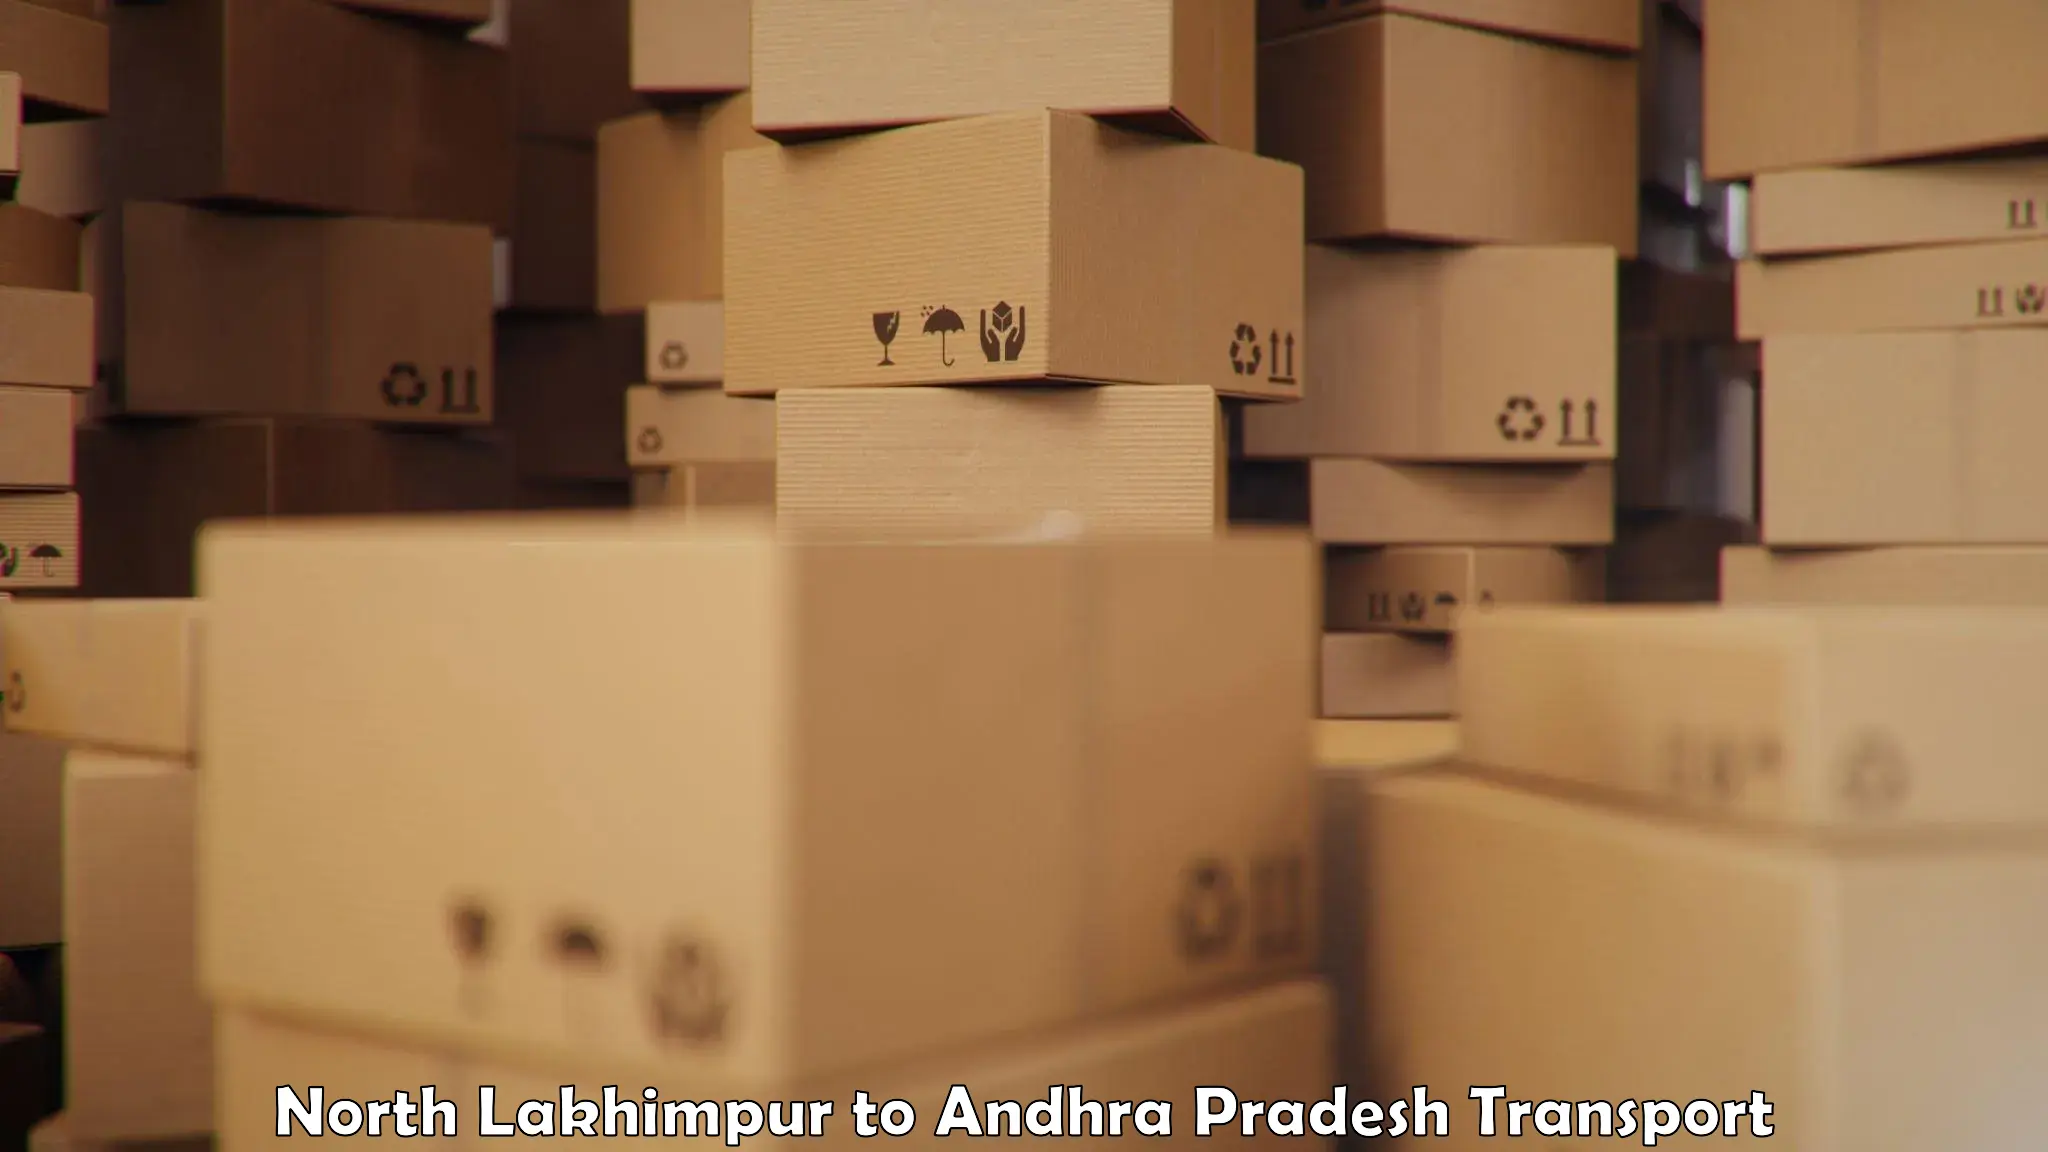 Road transport online services North Lakhimpur to Gullapalli